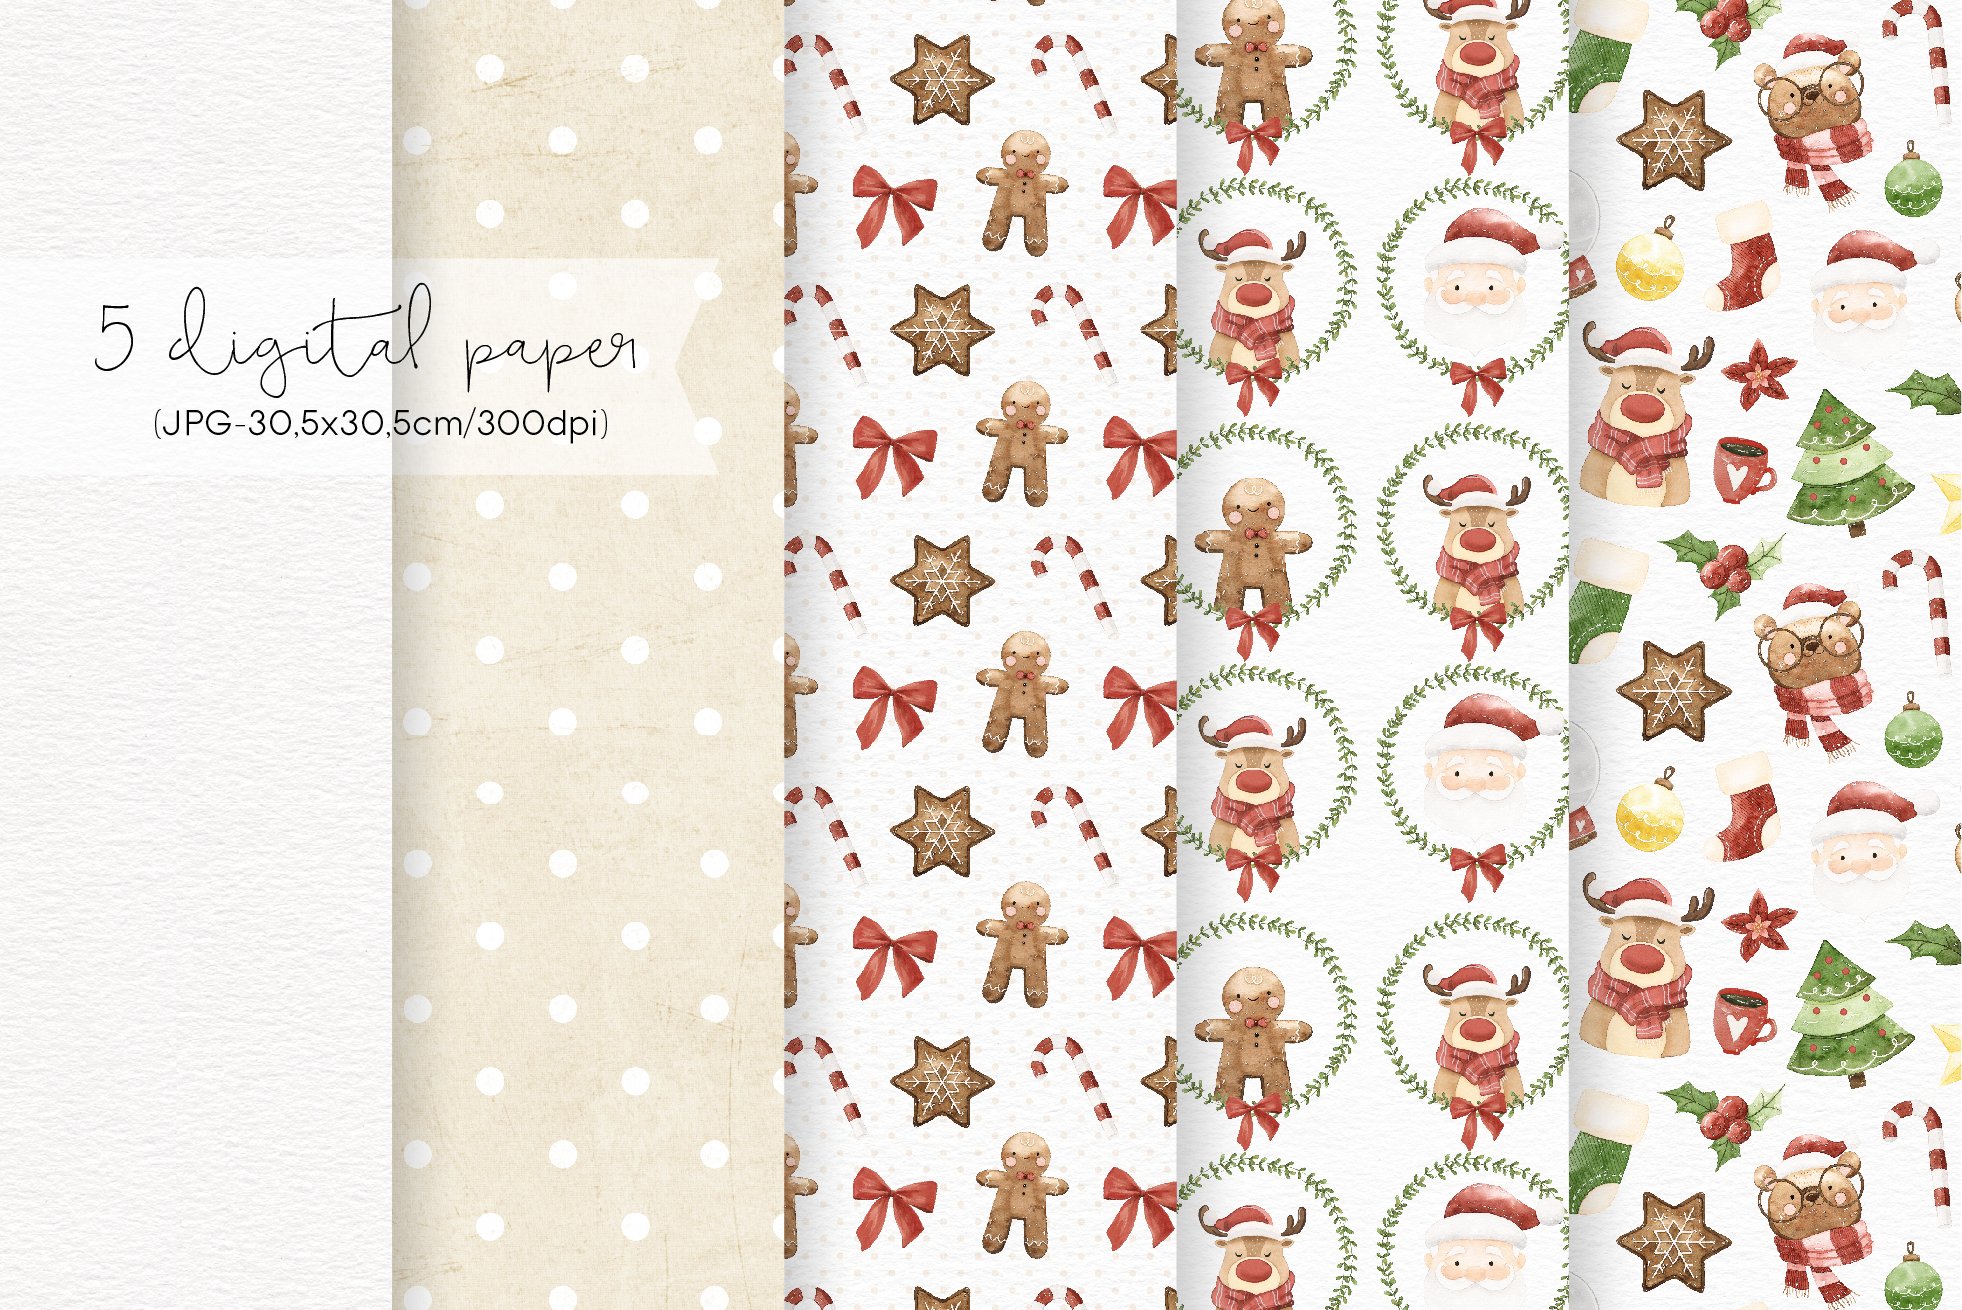 Some Christmas patterns with different elements.